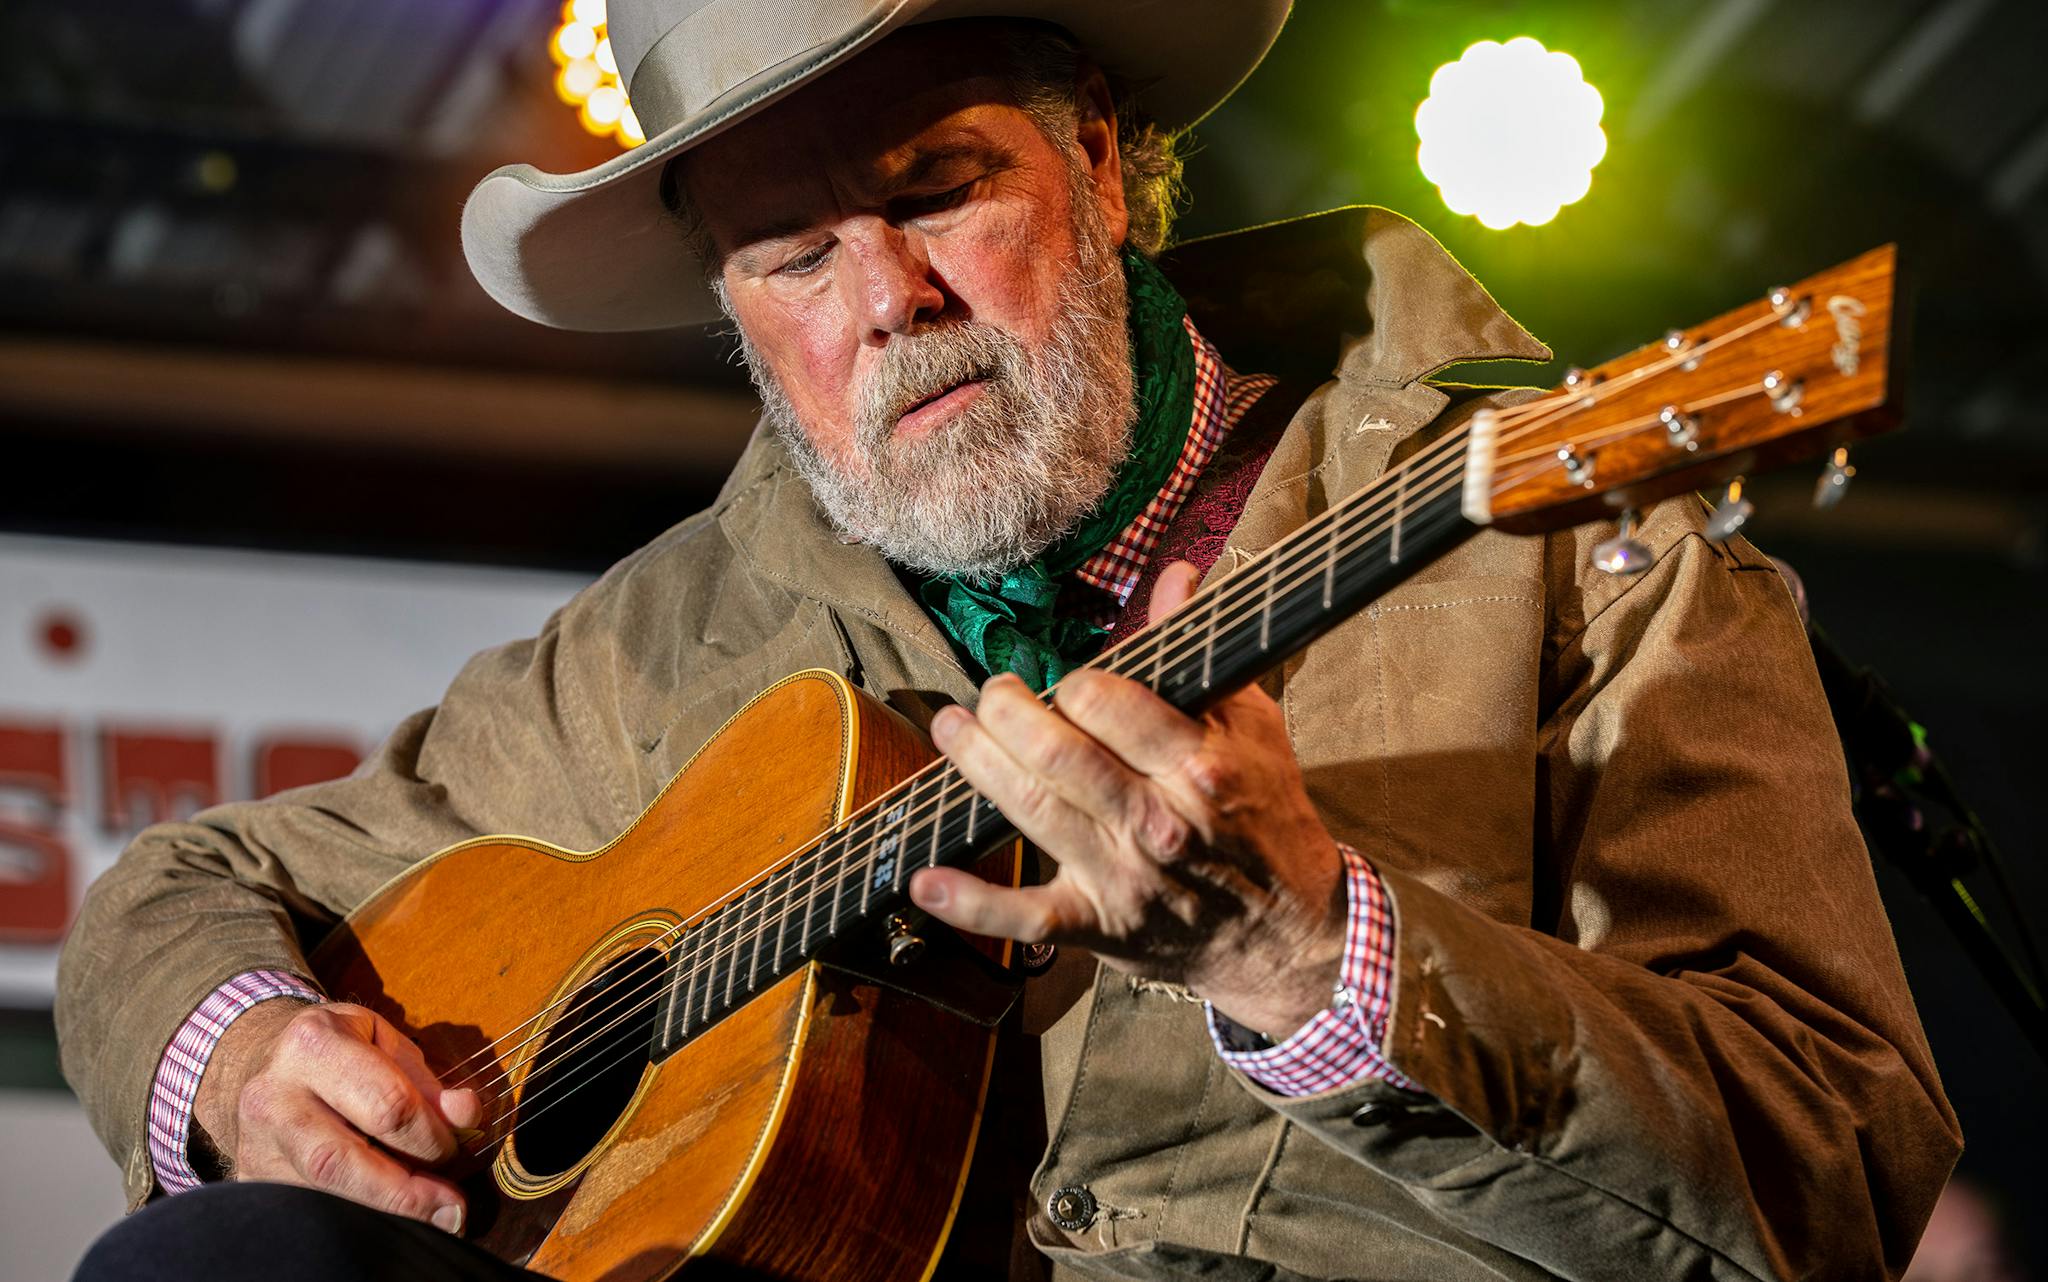 Robert Earl Keen performs during his second to last show at John T. Floore’s Country Store in Helotes, Texas, on Sept. 3, 2022.